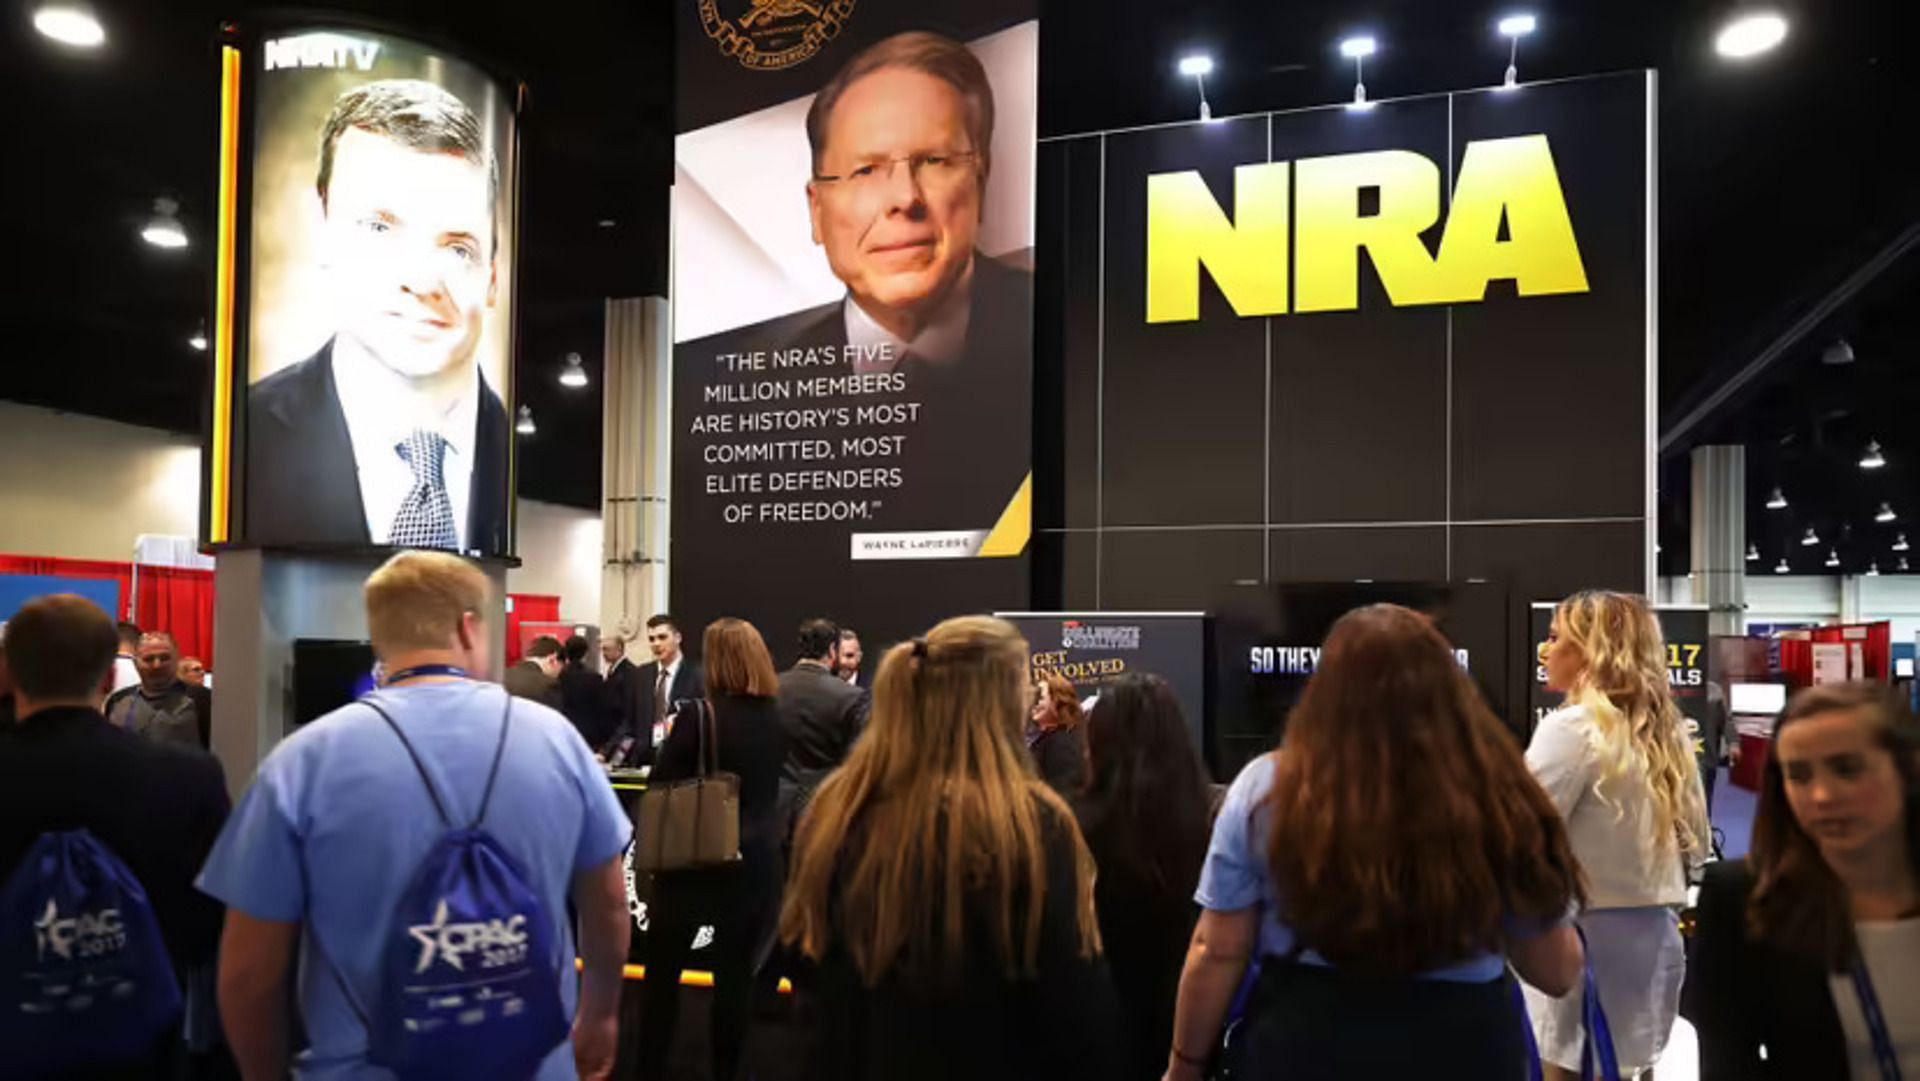 NRA, a pro-gun rights group, receives massive hate online for a convention they&#039;re planning (Image via Getty)